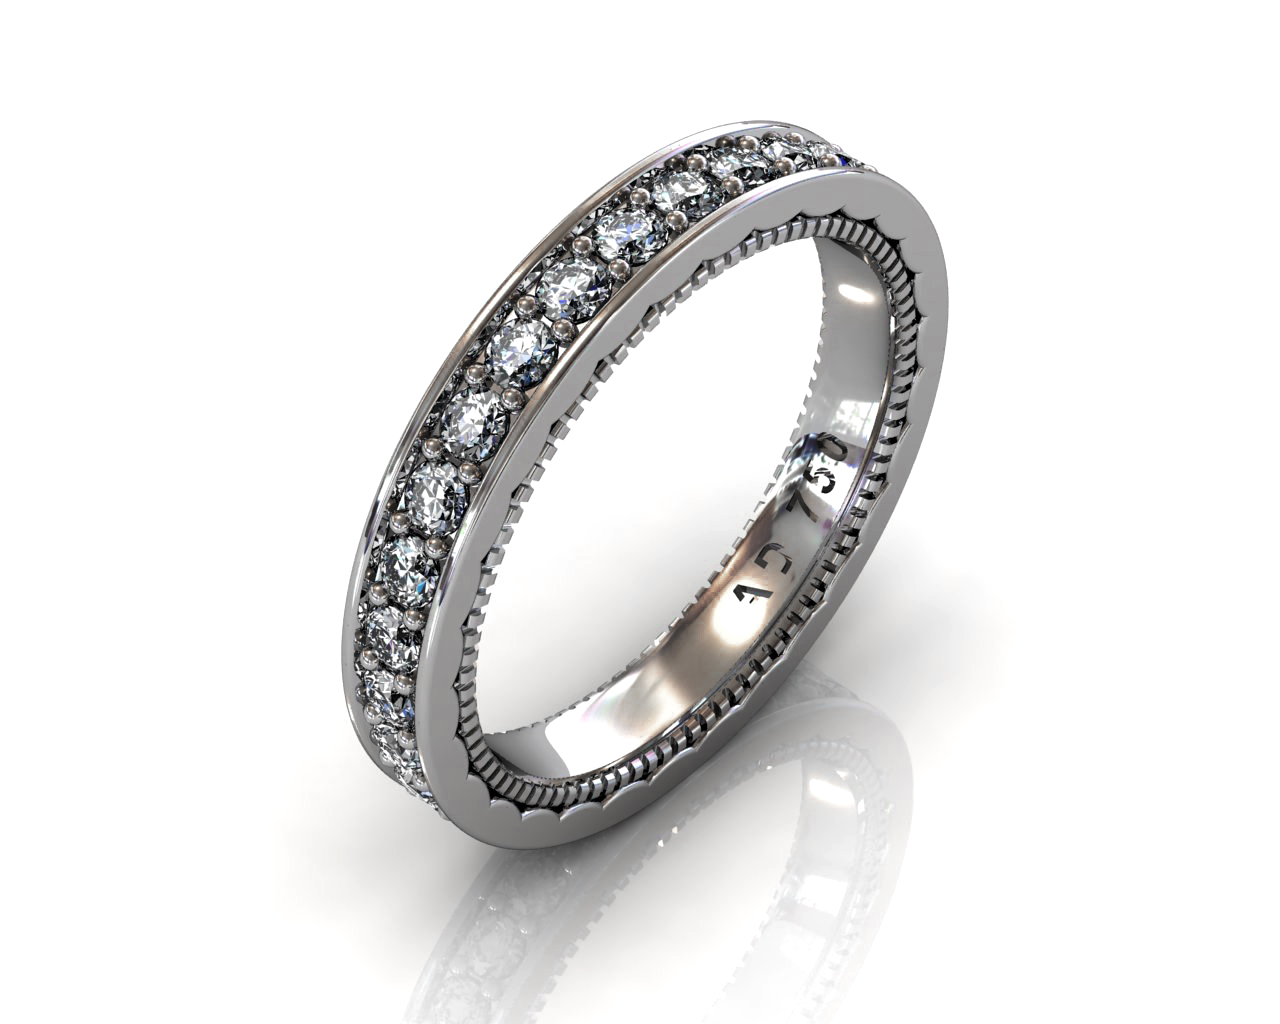 Wedding Bands Ladies Channel Set 30 Stone 0.89 TCW Diamonds 3.92g 18kt White Gold - South Bay Gold